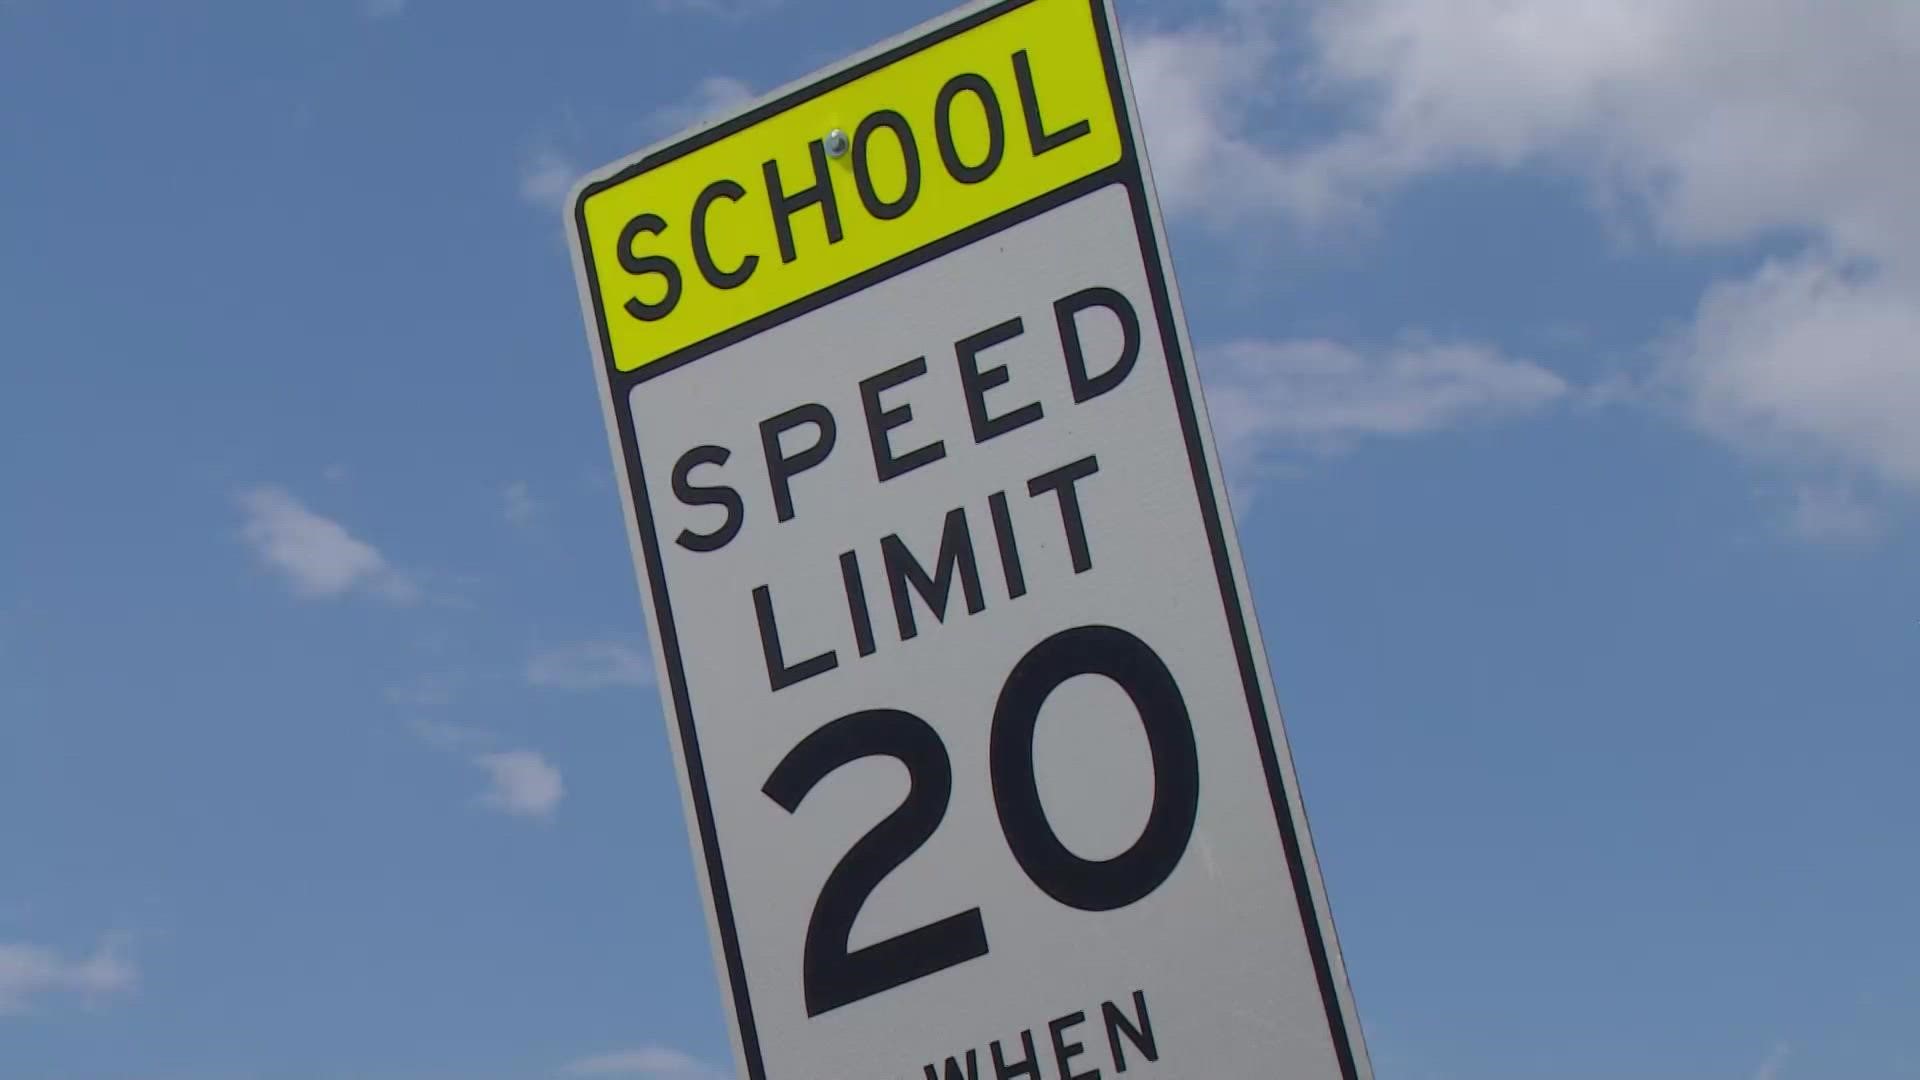 The Dallas Police Department said the increase in foot and vehicle traffic around these local schools as a reason for the increased enforcement as well.